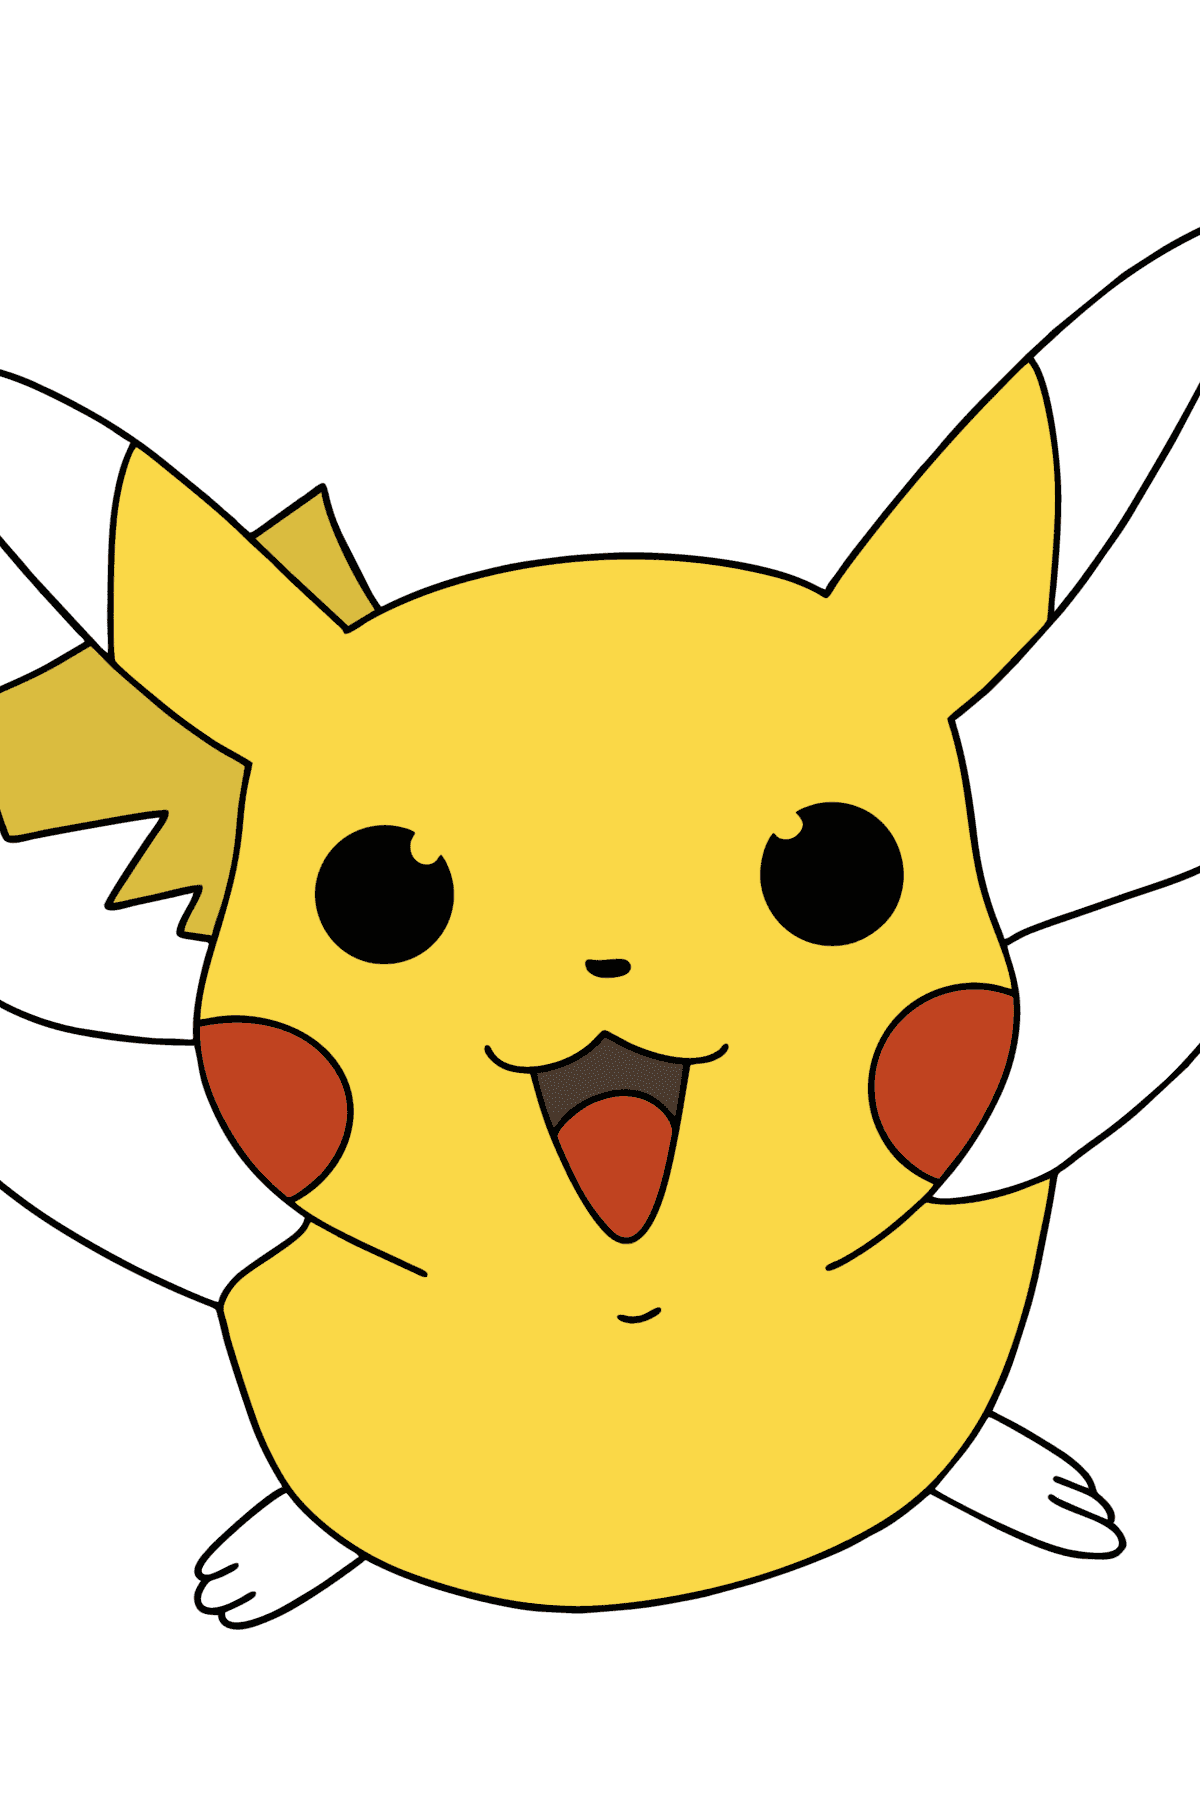 Colouring page Pokémon X and Y Pikachu - Coloring Pages for Kids